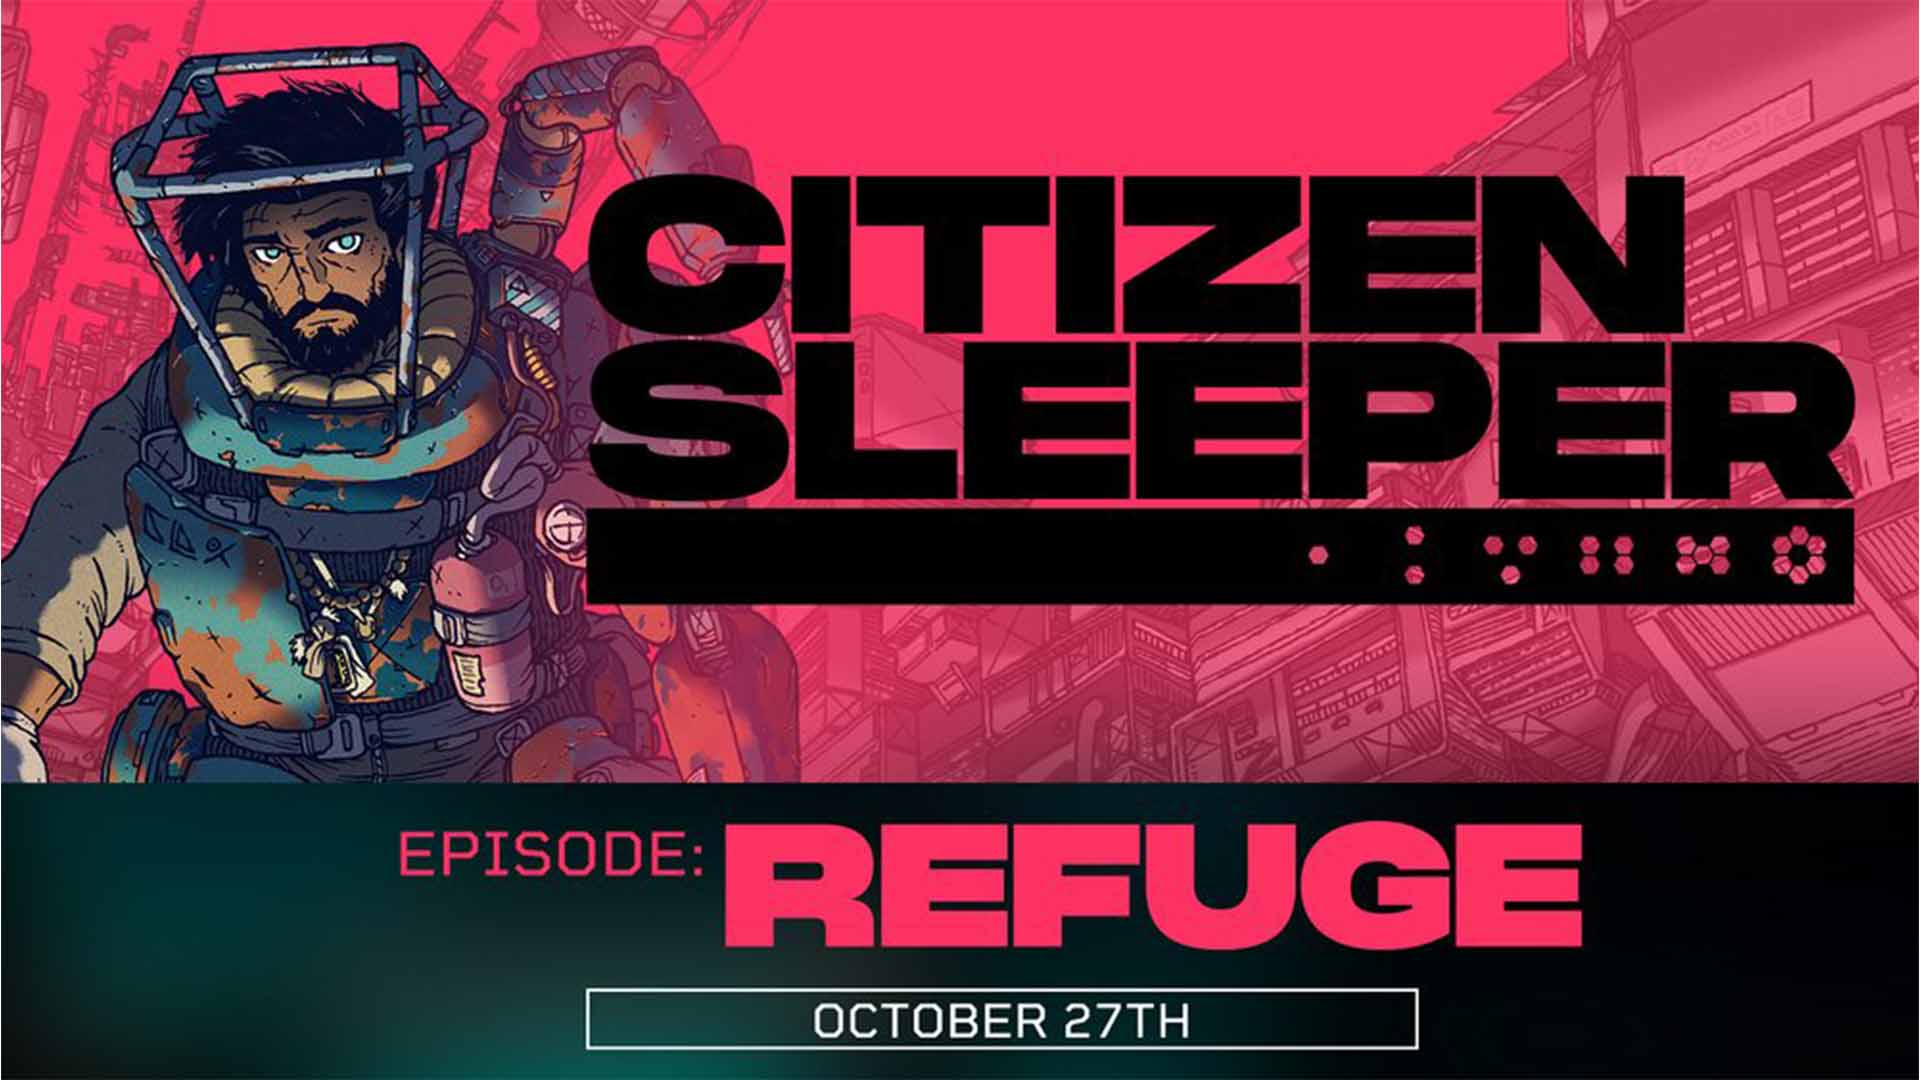 Citizen Sleeper has more free DLC coming in October